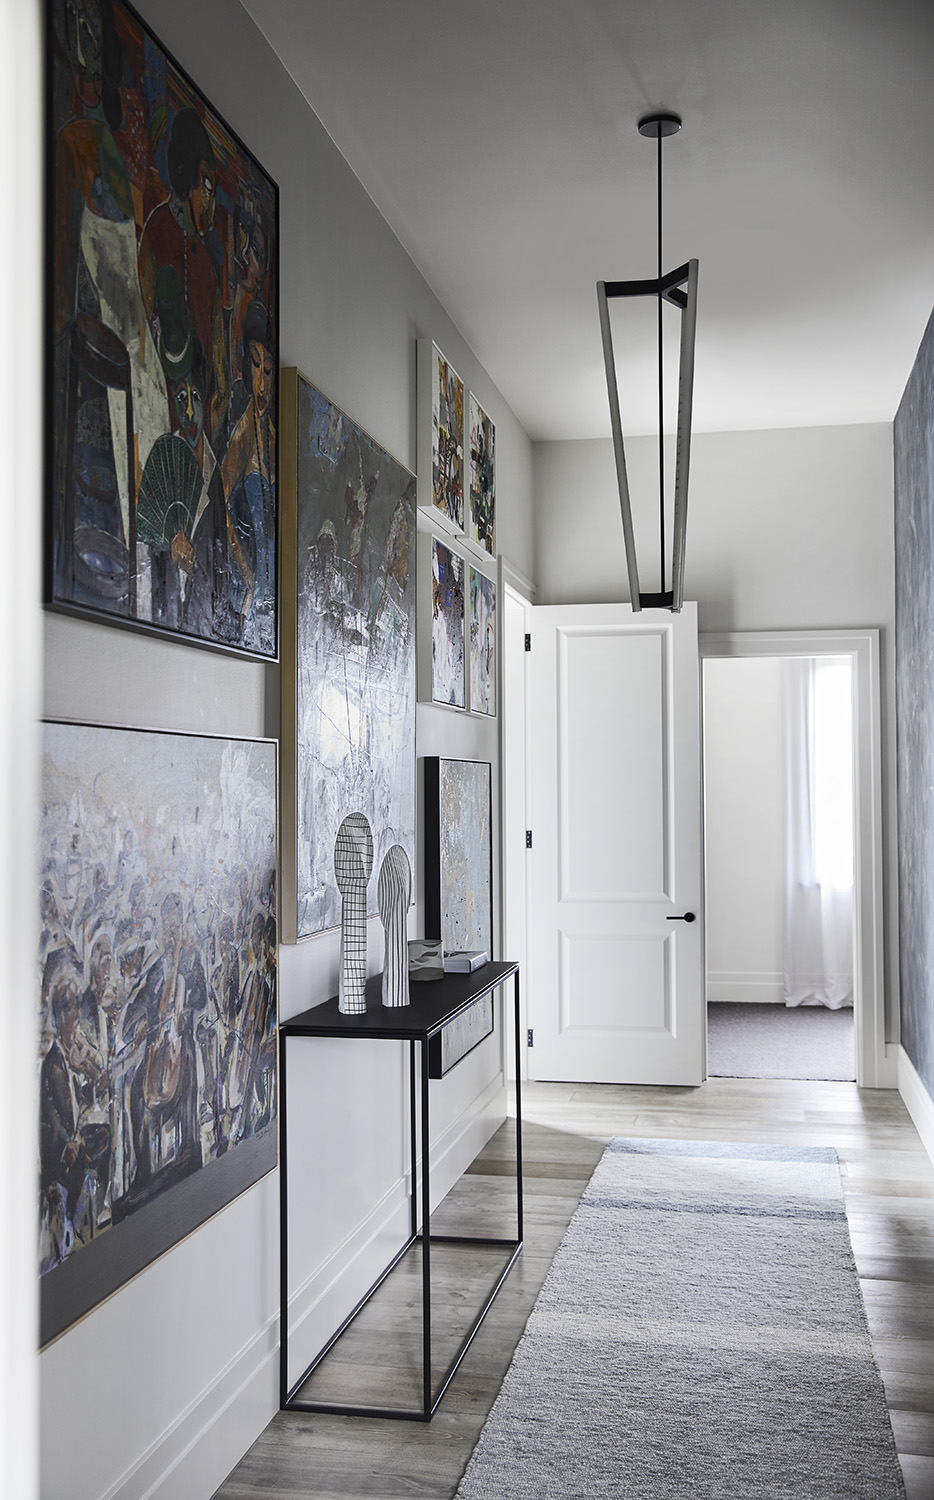 In this modern hallway, artwork covers the walls, while French oak timber flooring can be found throughout the home.